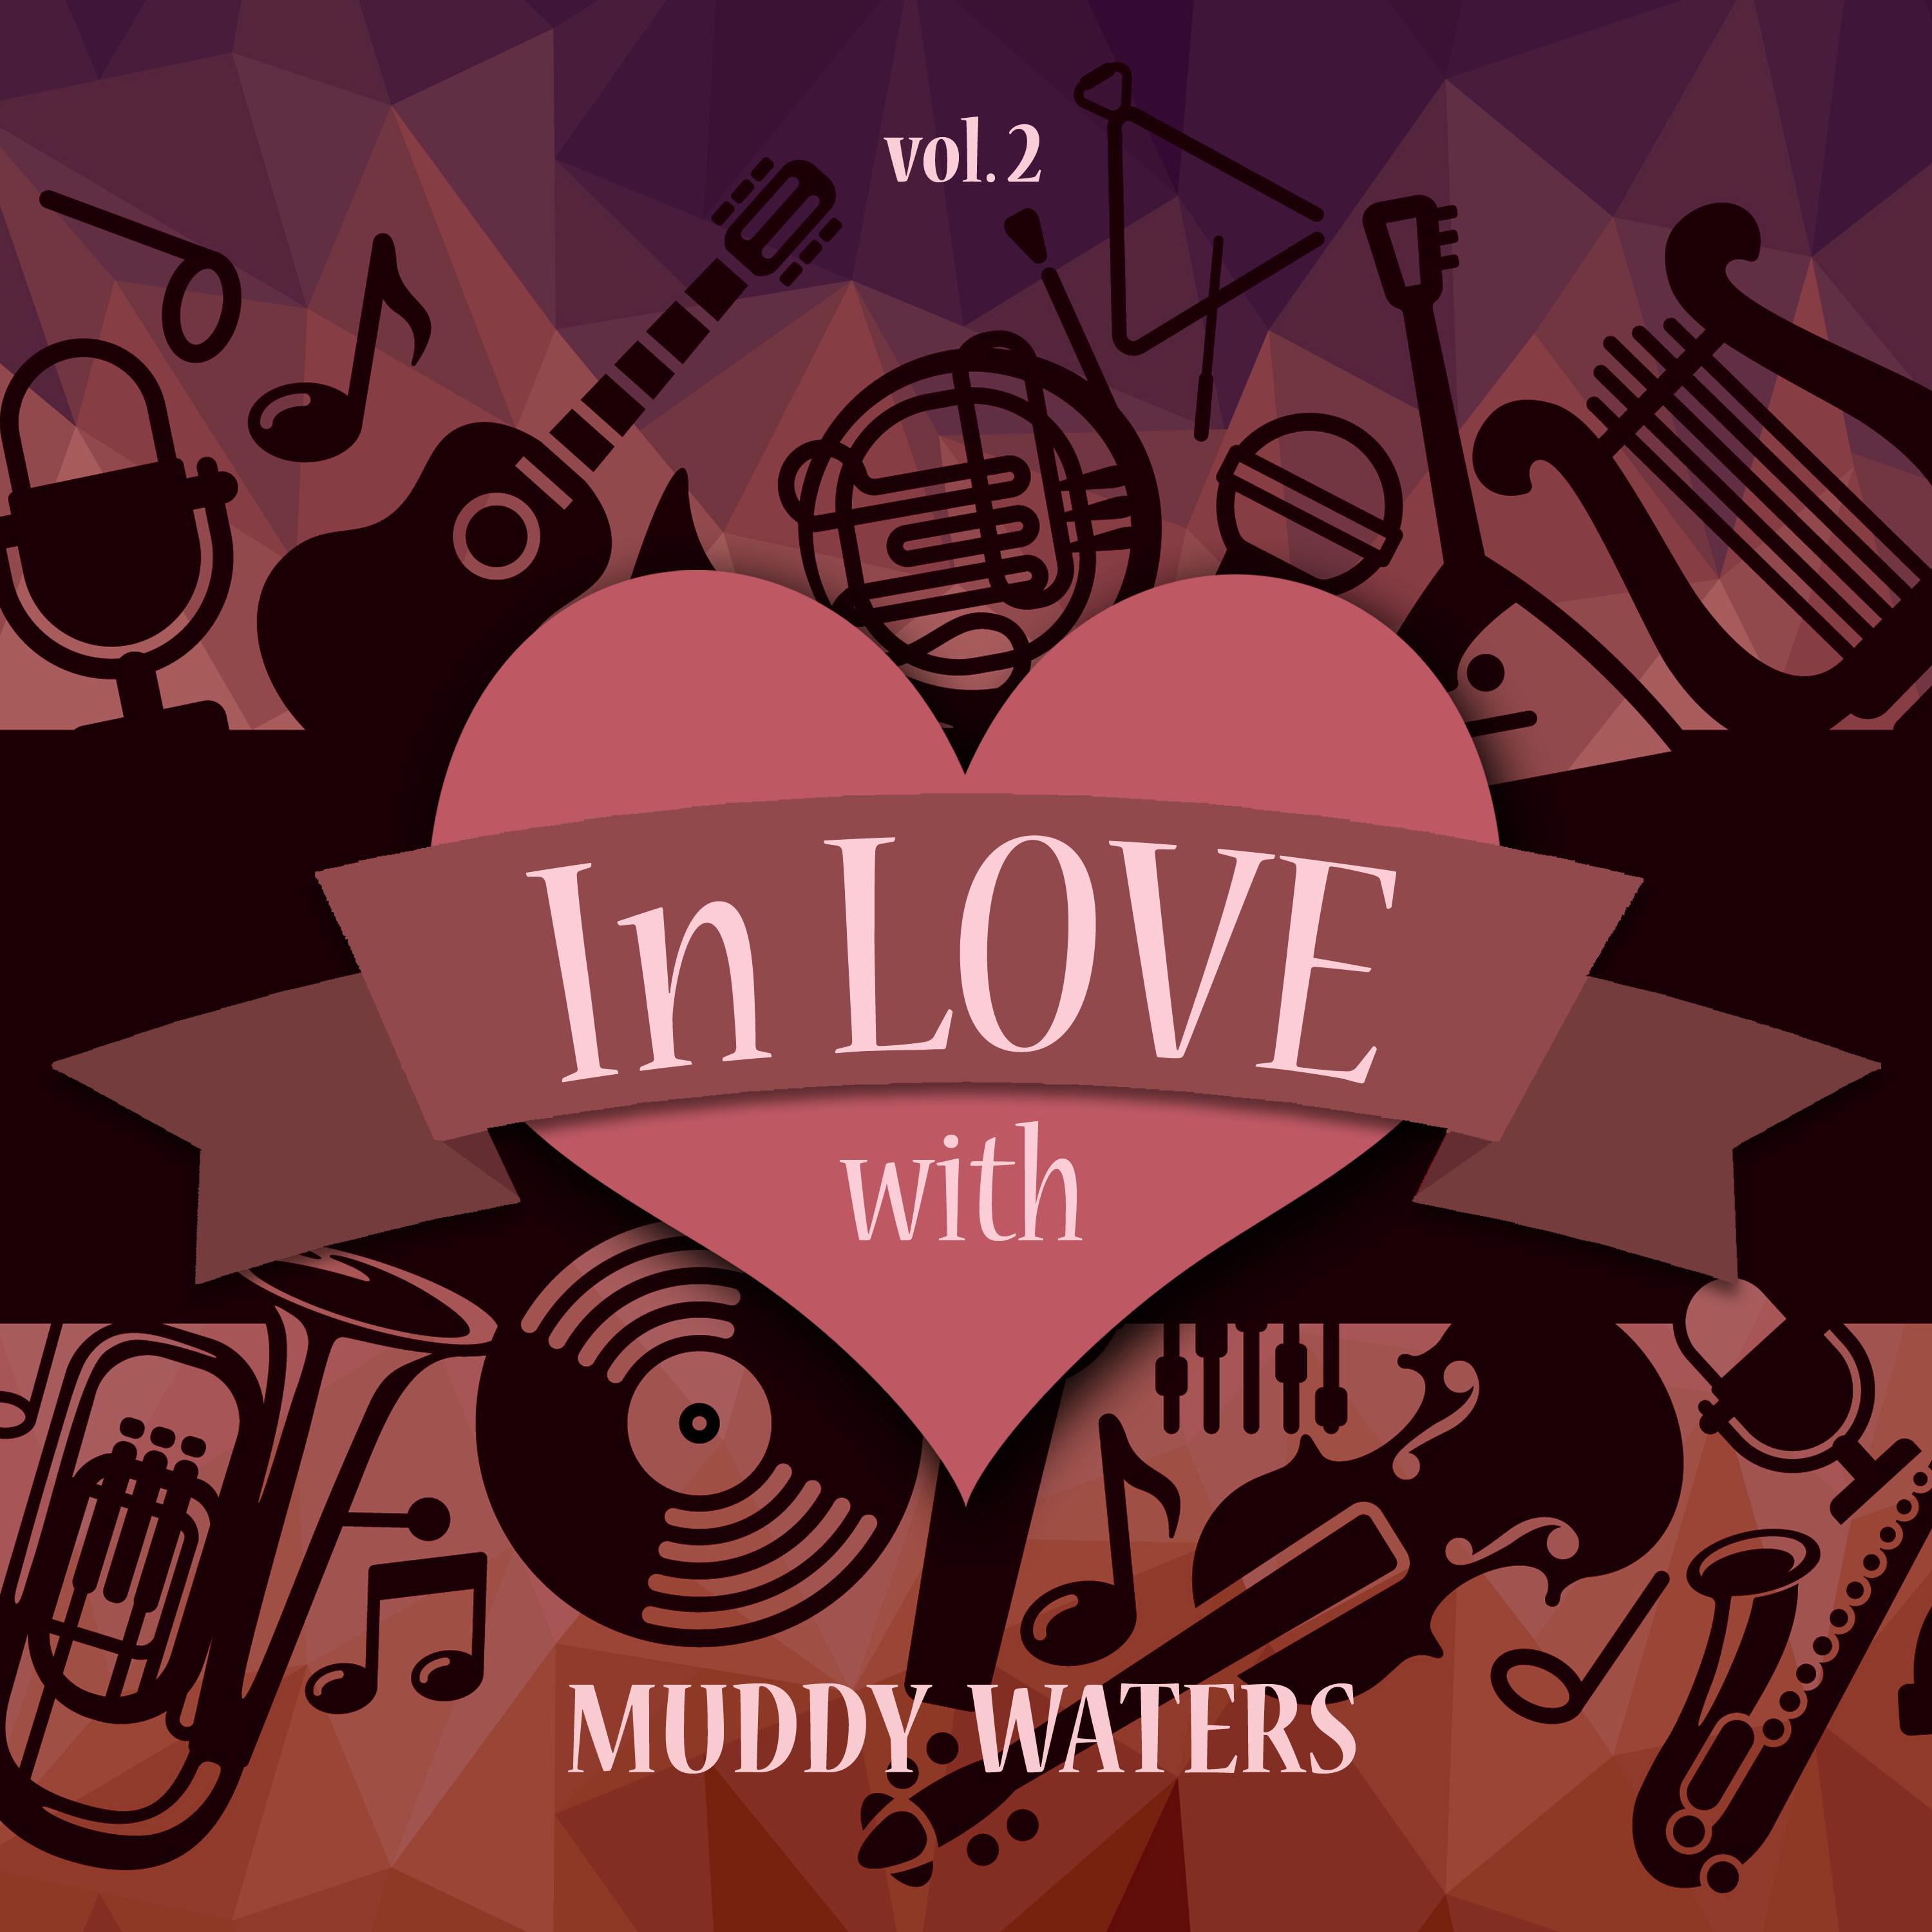 In Love with Muddy Waters, Vol. 2